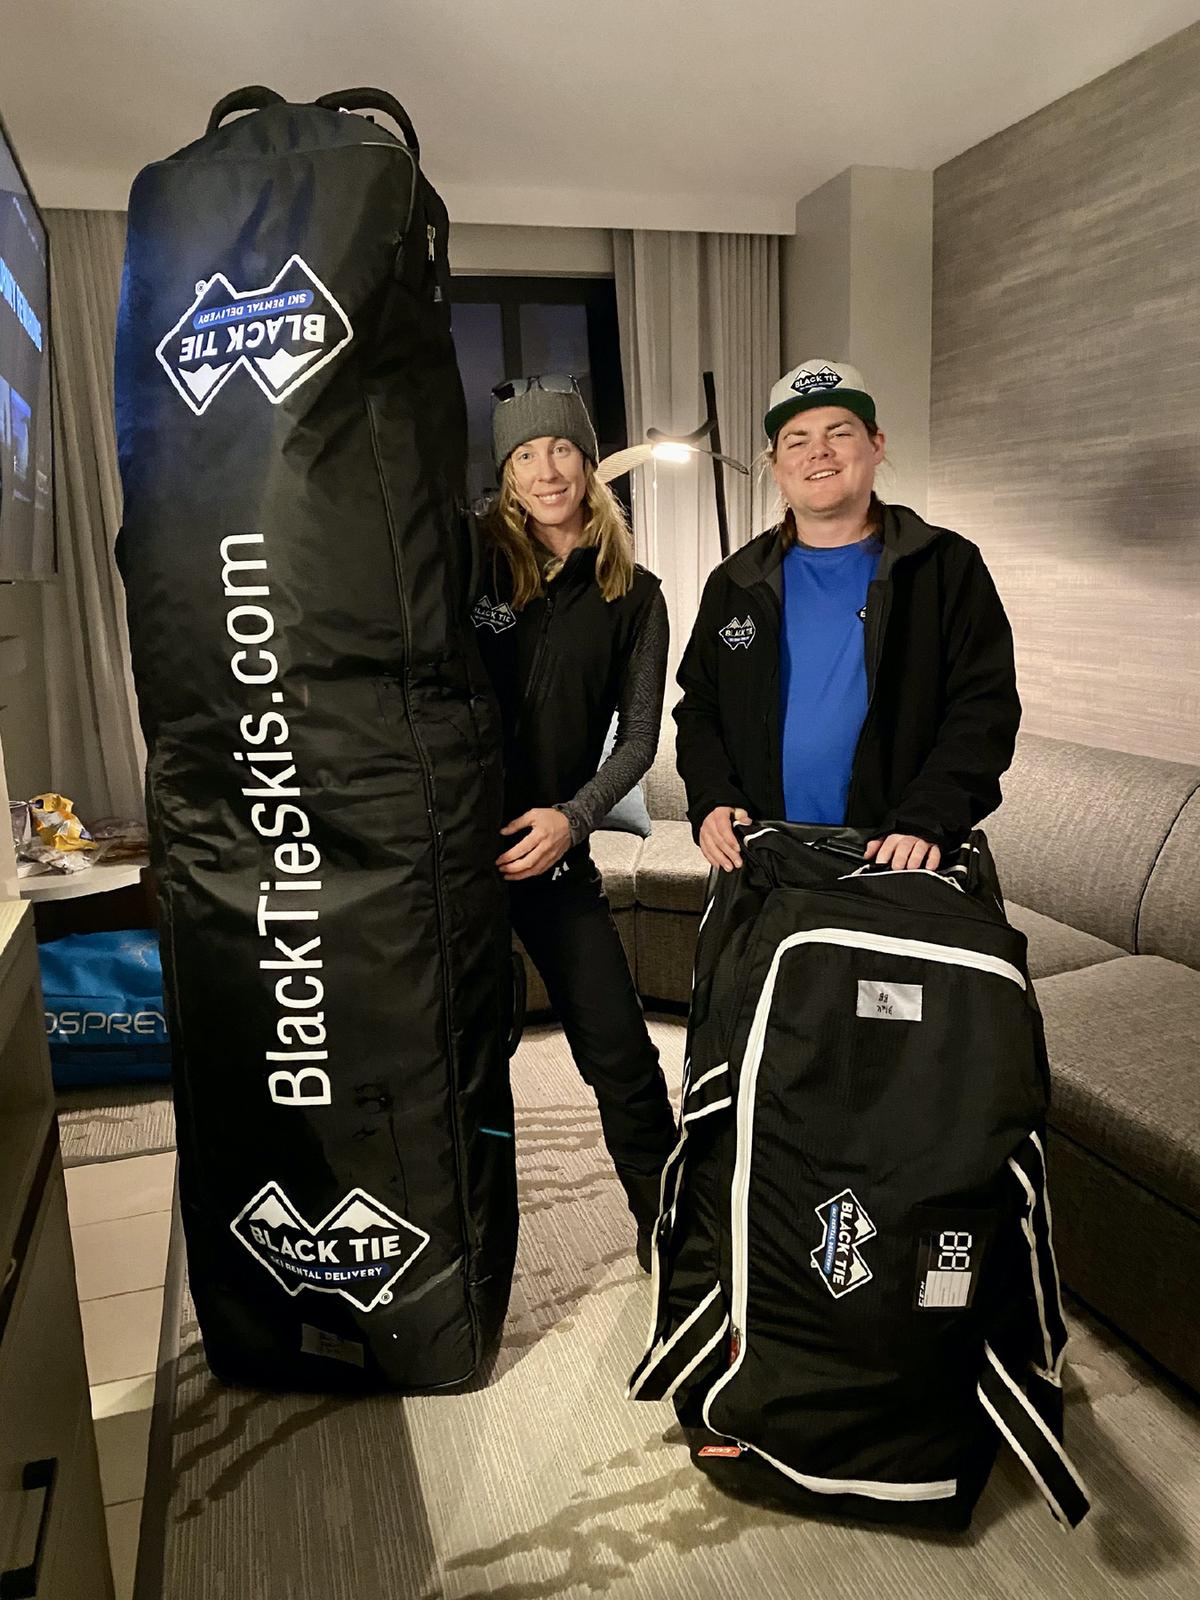 Black Tie Ski Rentals of Mammoth makes rentals easy, bringing everything skiers need to their hotel rooms at Mammoth Lake, California. (Margot Black)